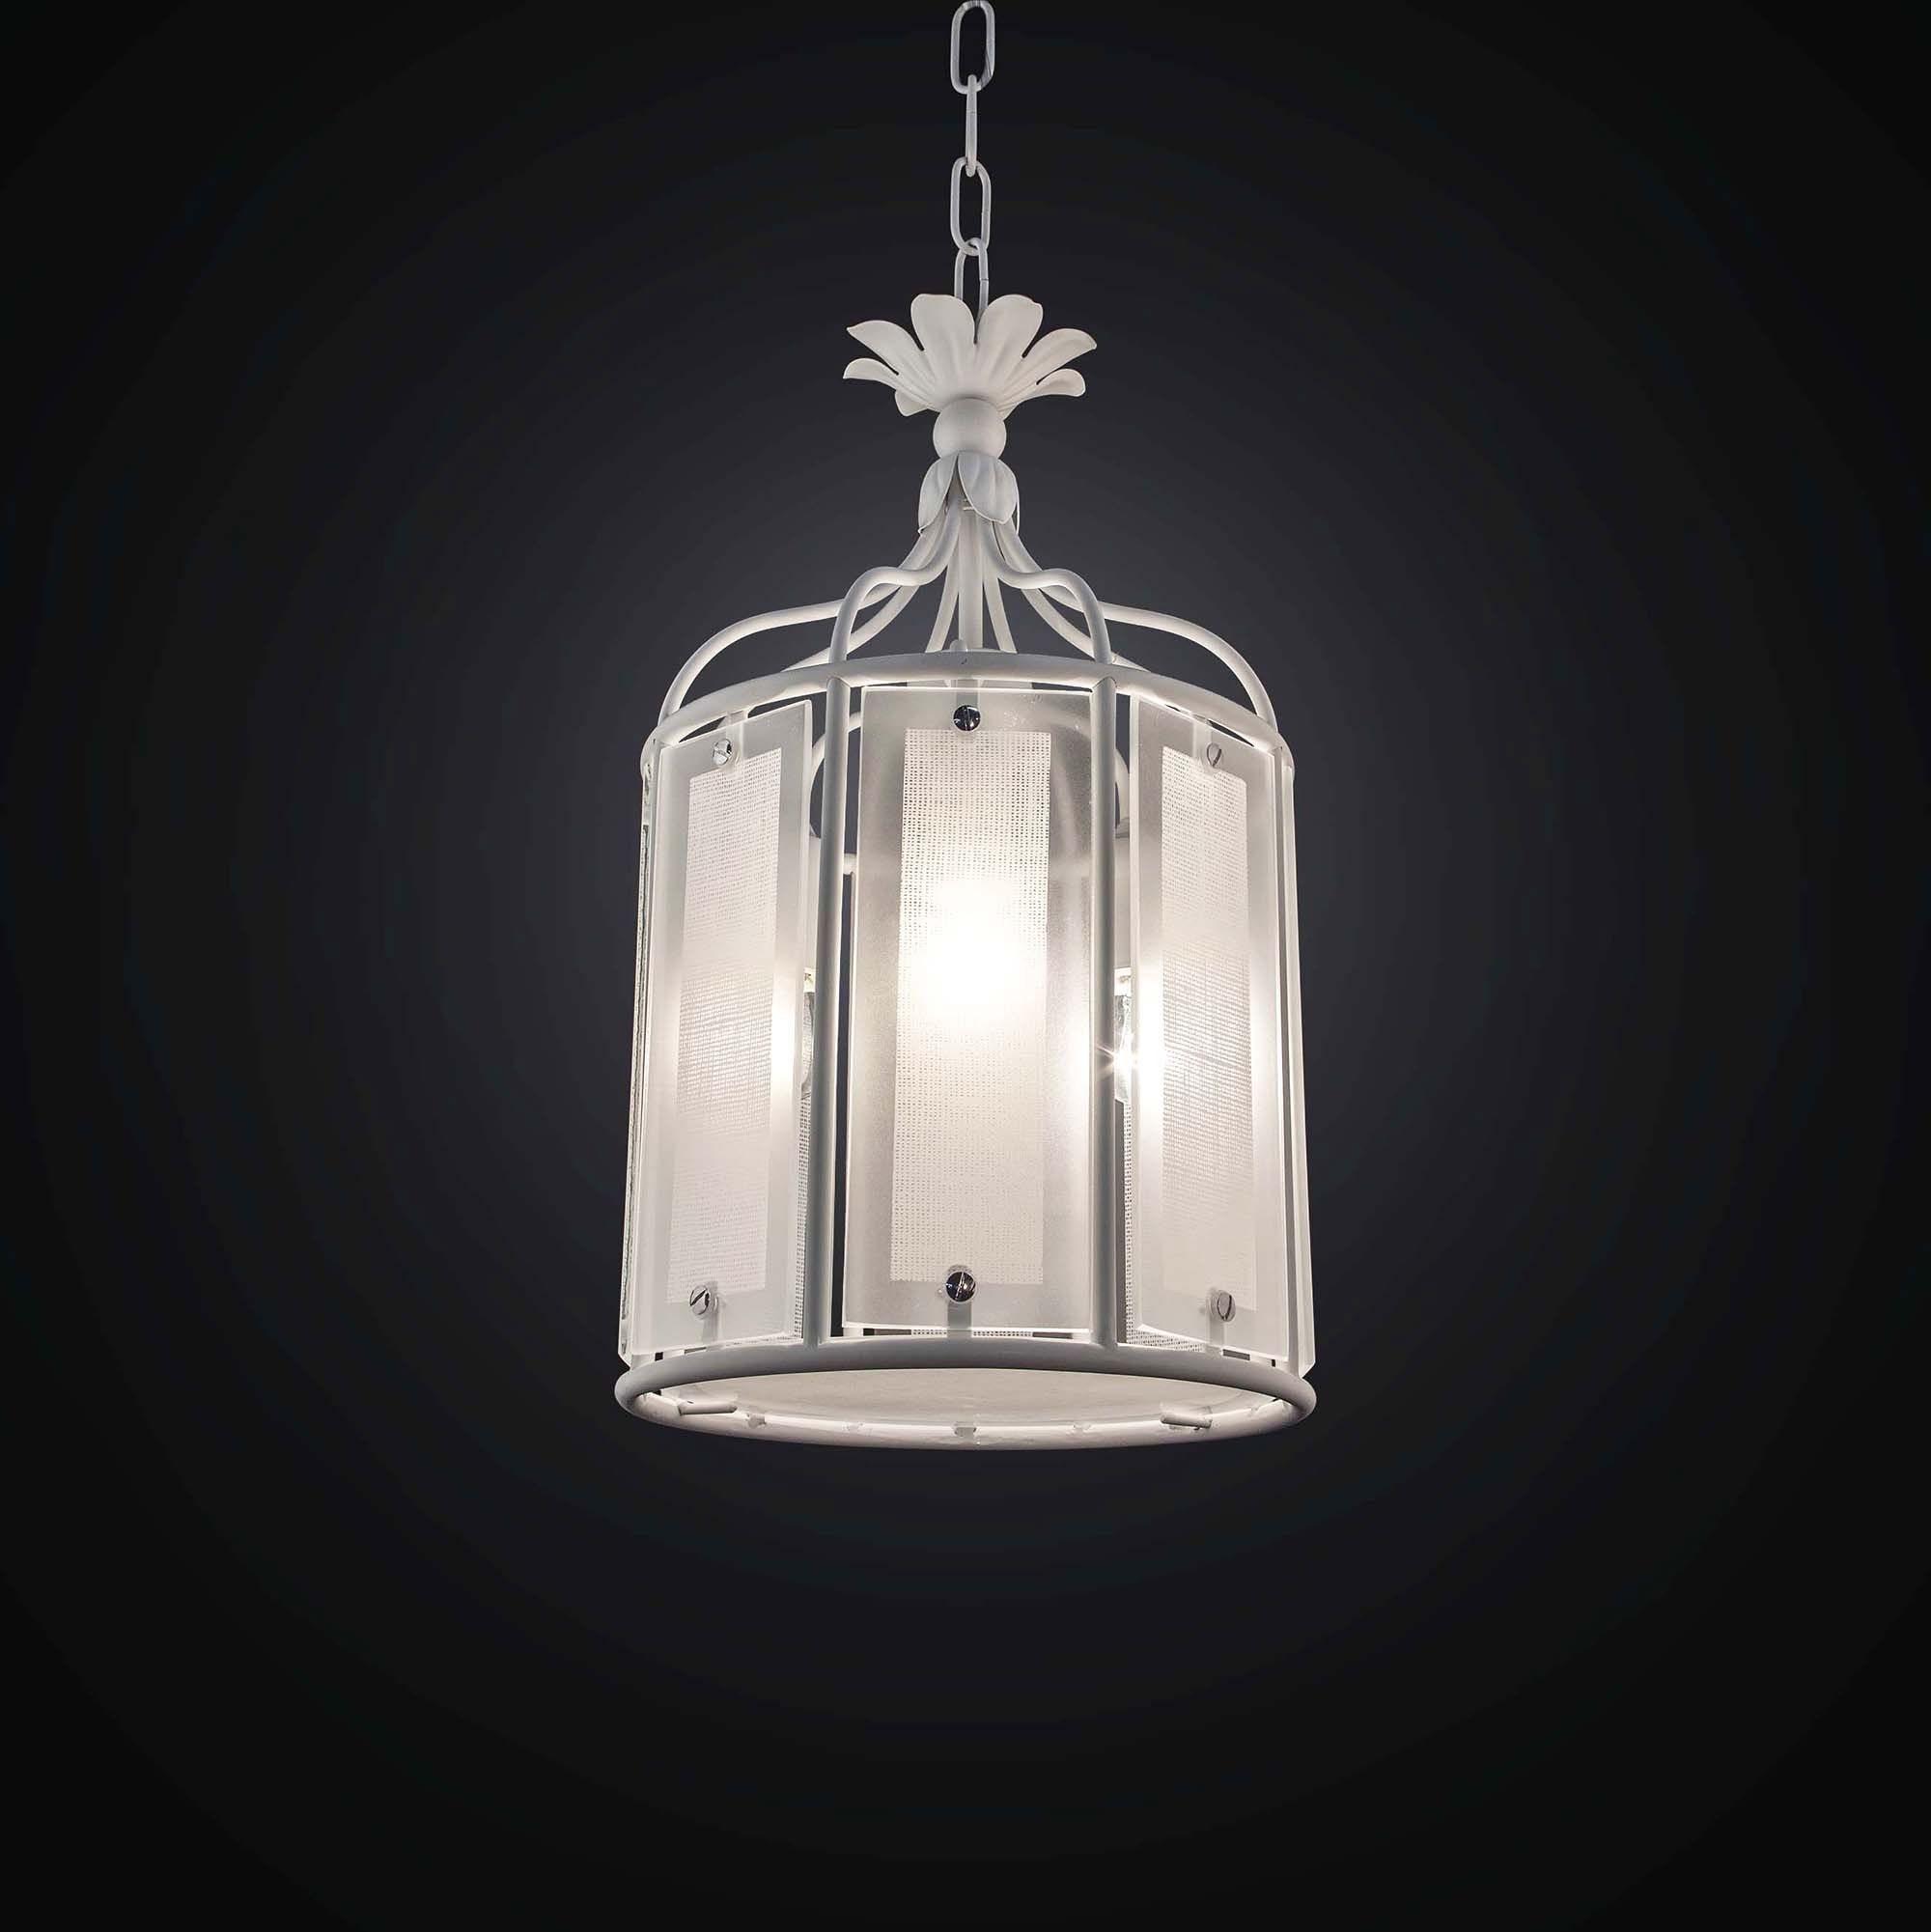 Classic Chandelier In White Wrought Iron Cage 3 Lights Bga 2635 / S25 Intended For Most Popular Cage Metal Shade Lantern Chandeliers (View 3 of 10)